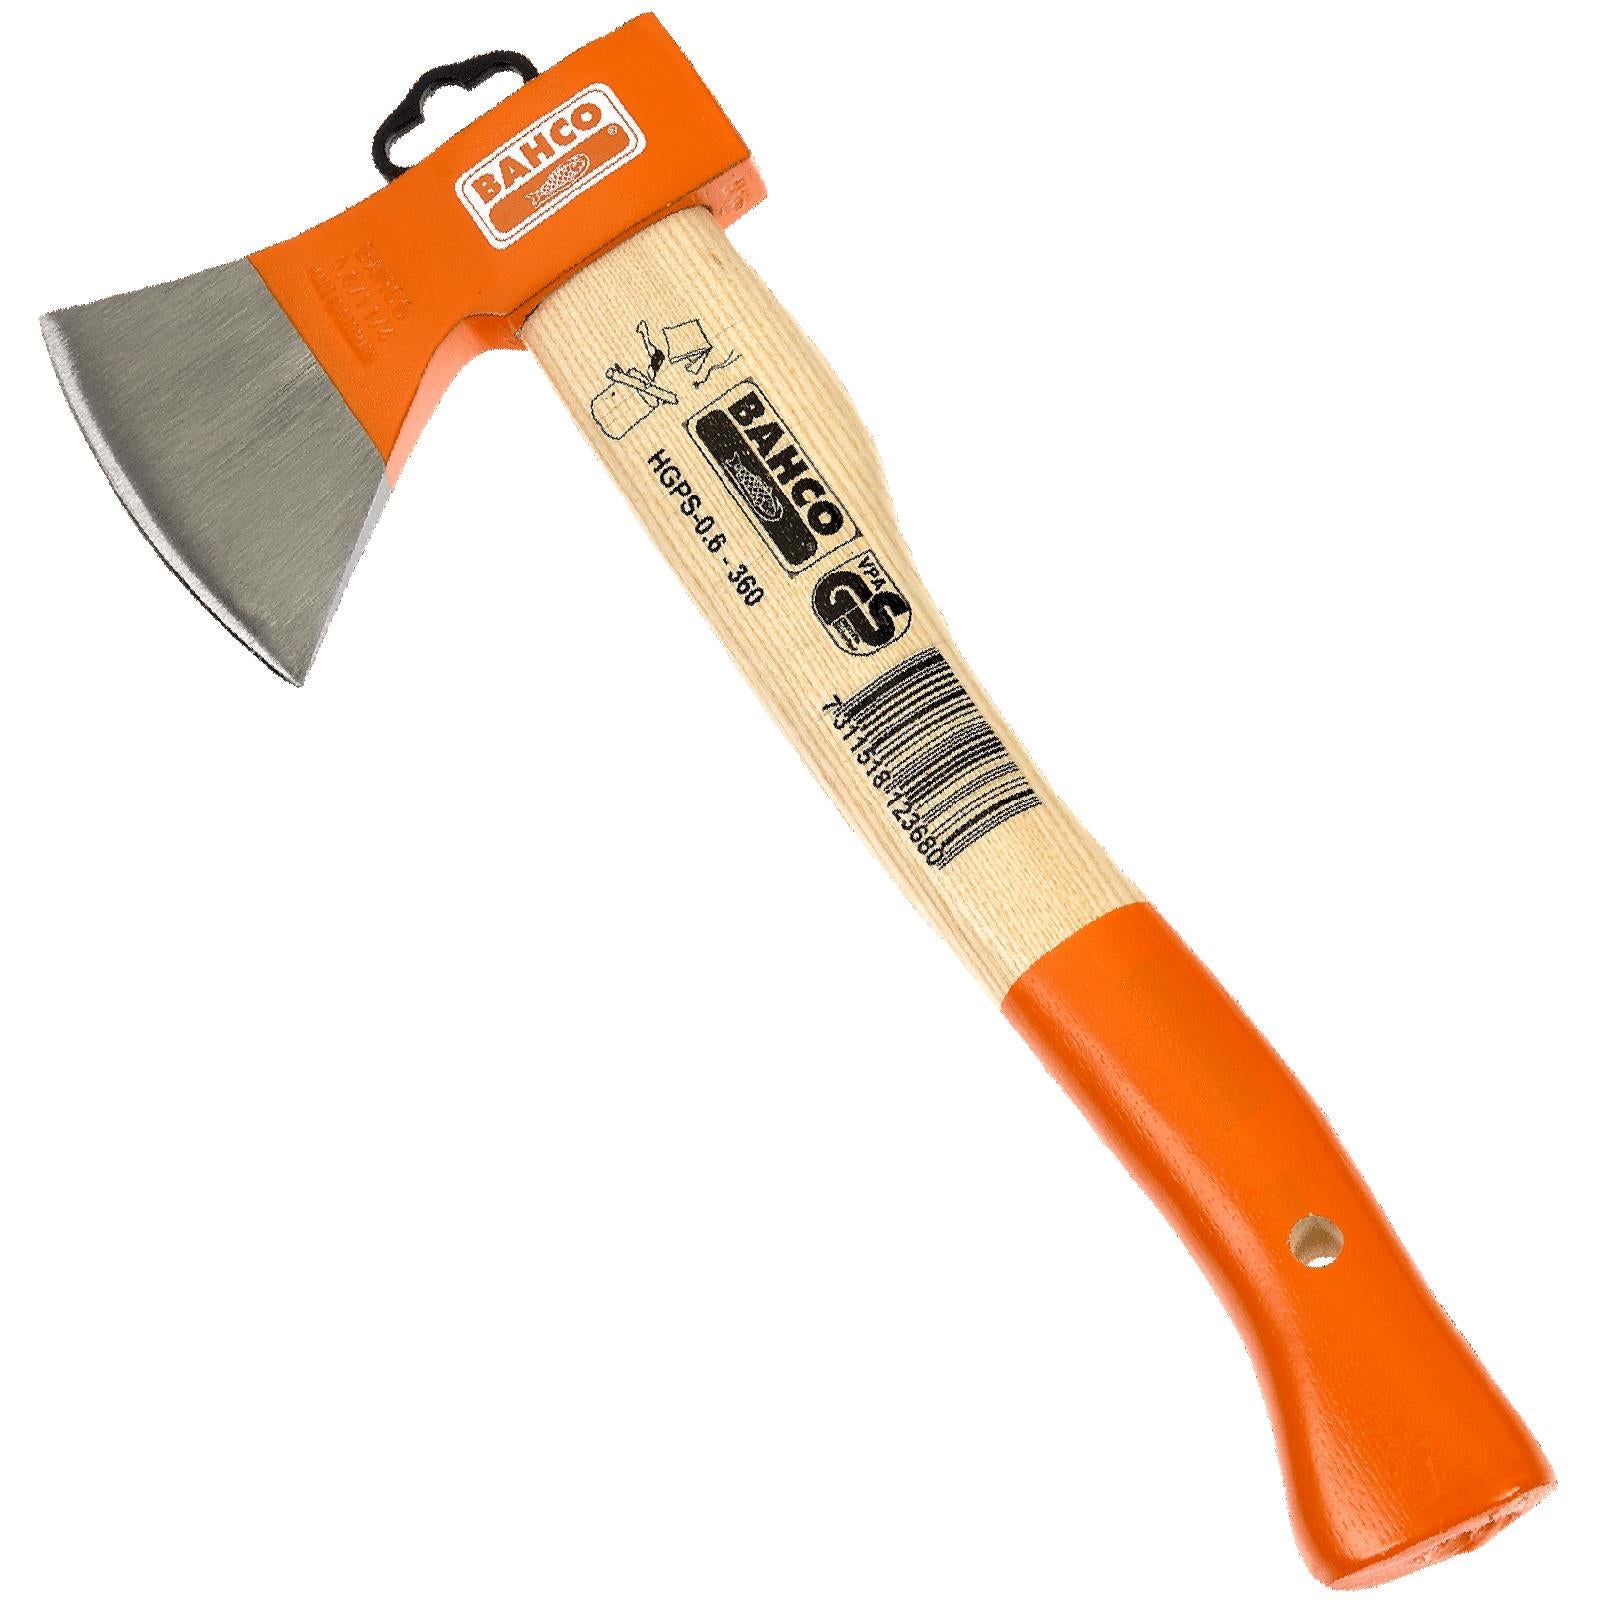 Bahco Camping Axe with Curved Ash Wood Handle 800g 28oz